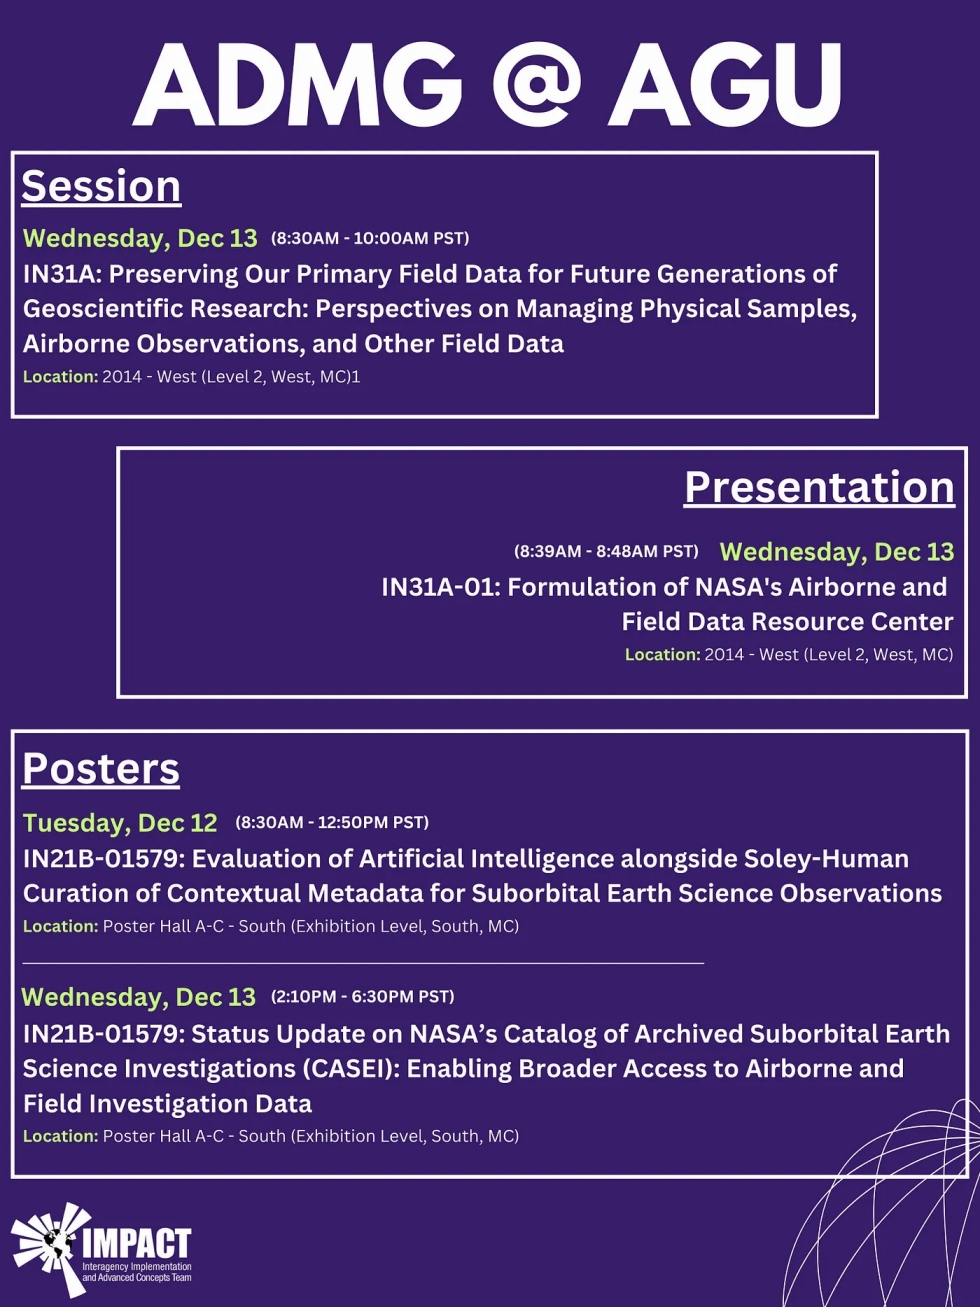 Poster listing for sessions hosted by the Airborne Data Management Group at the American Geophysical Union's 2023 annual meeting